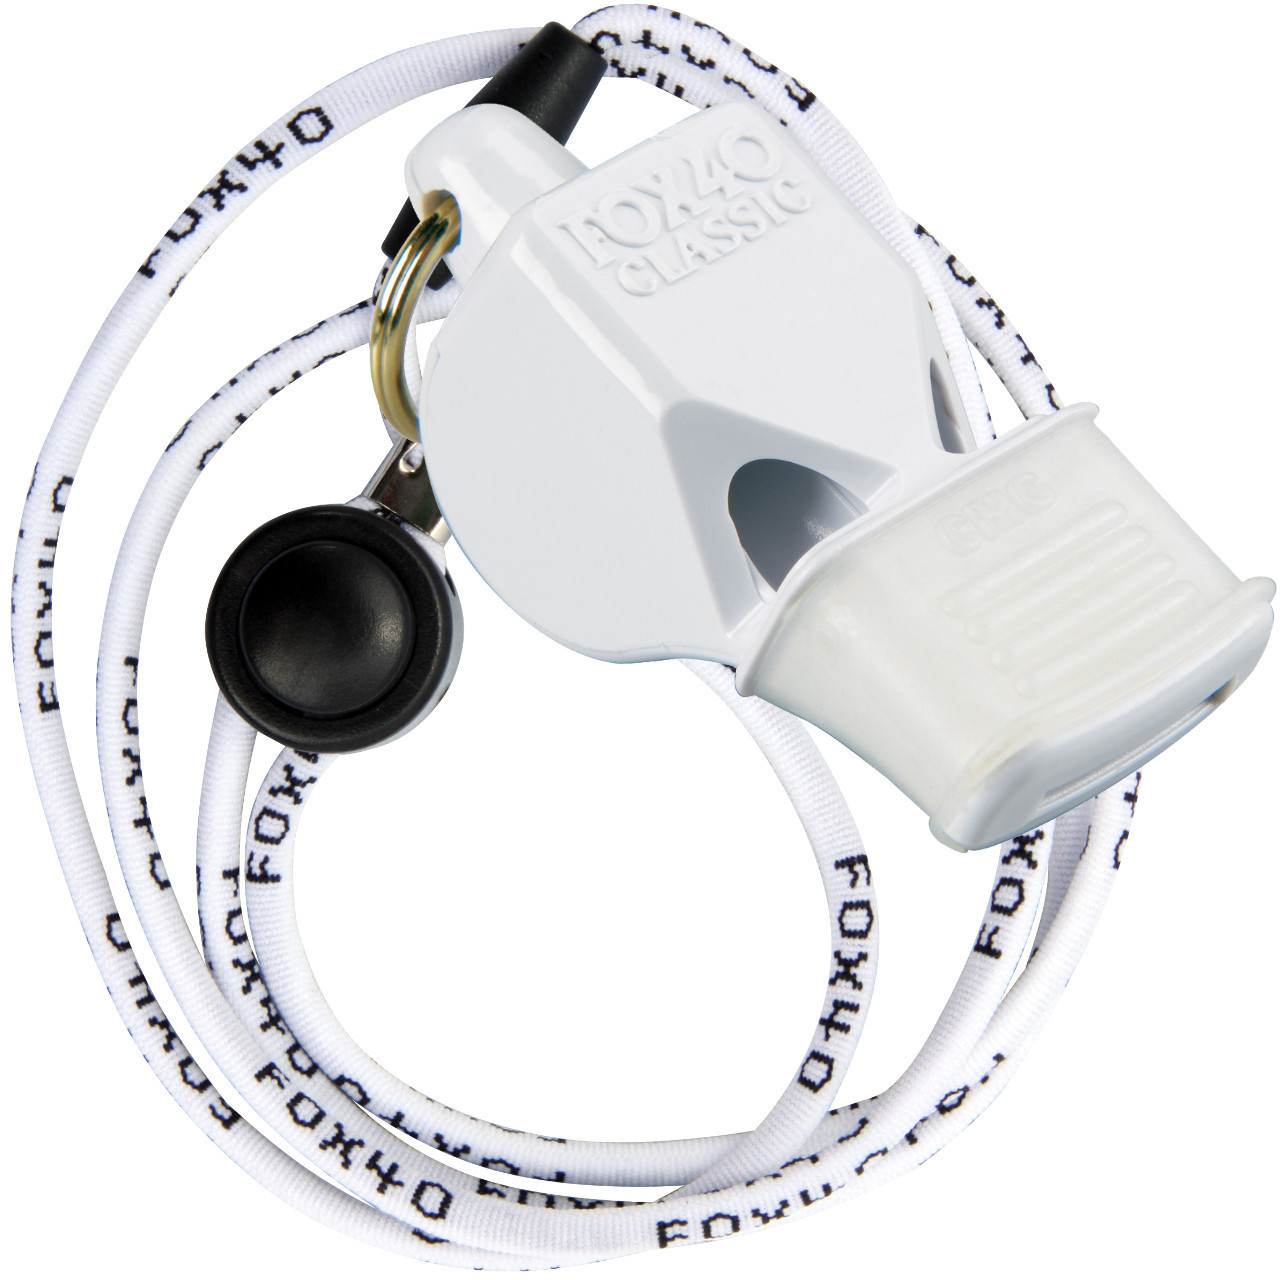 Fox 40 USA Sport Whistle, Classic Black with Mouth Grip